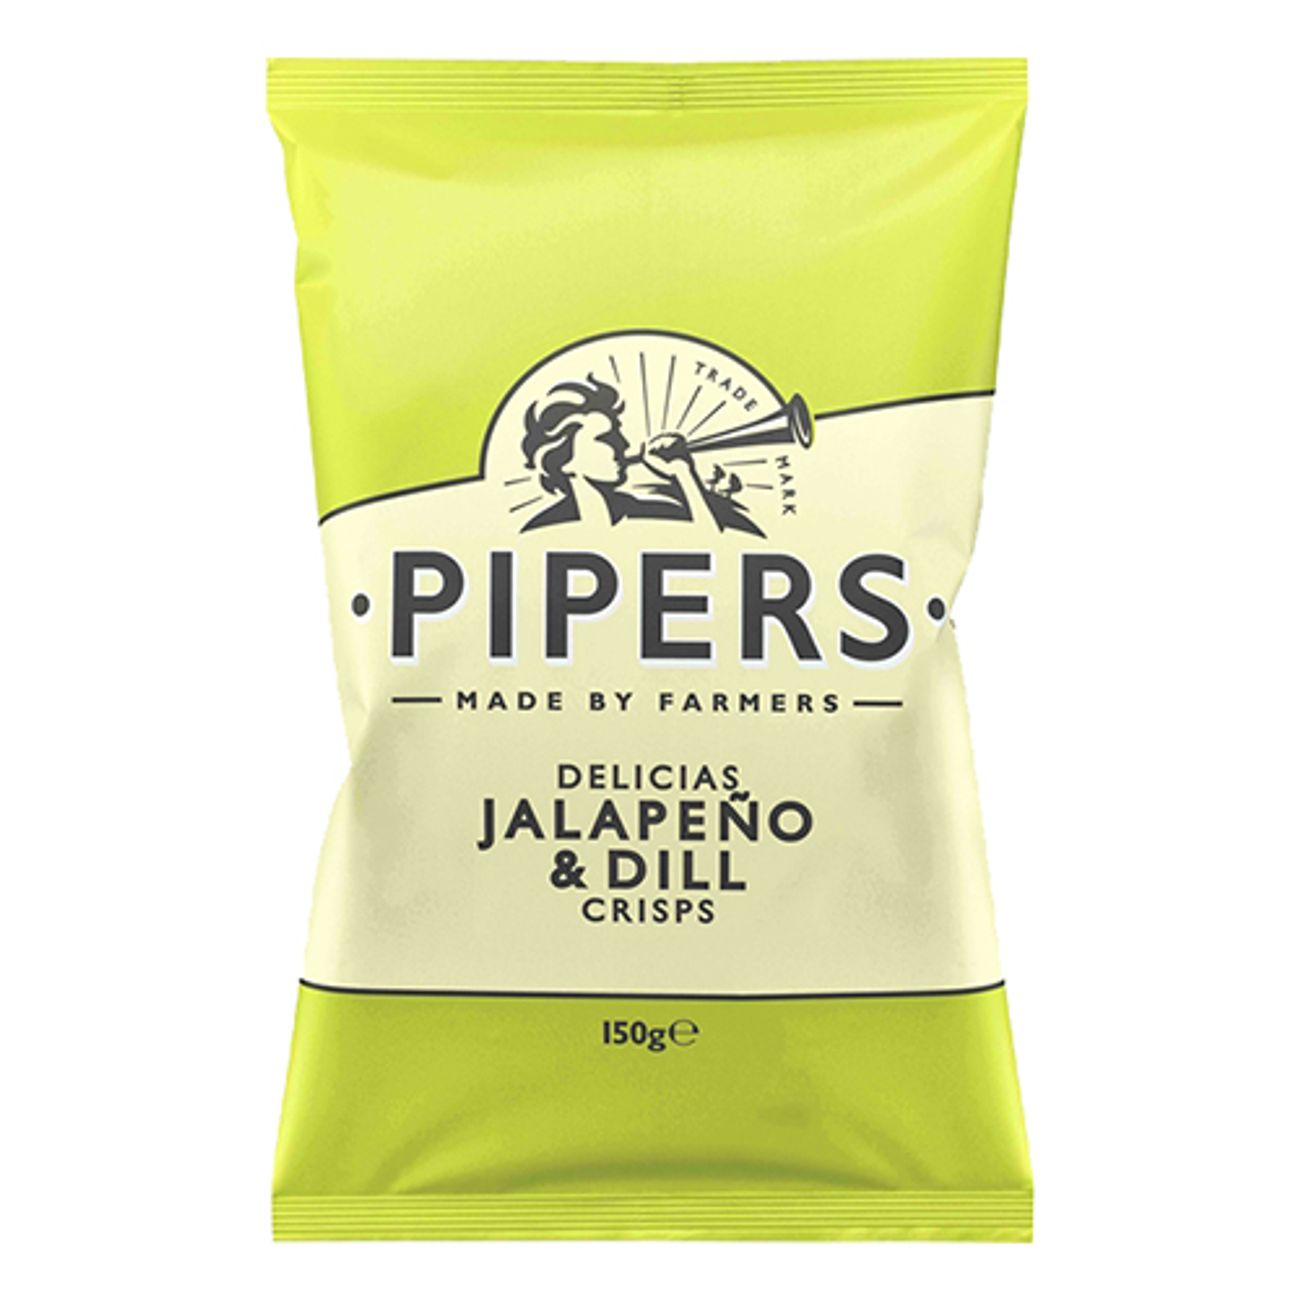 pipers-jalapeno-dill-2